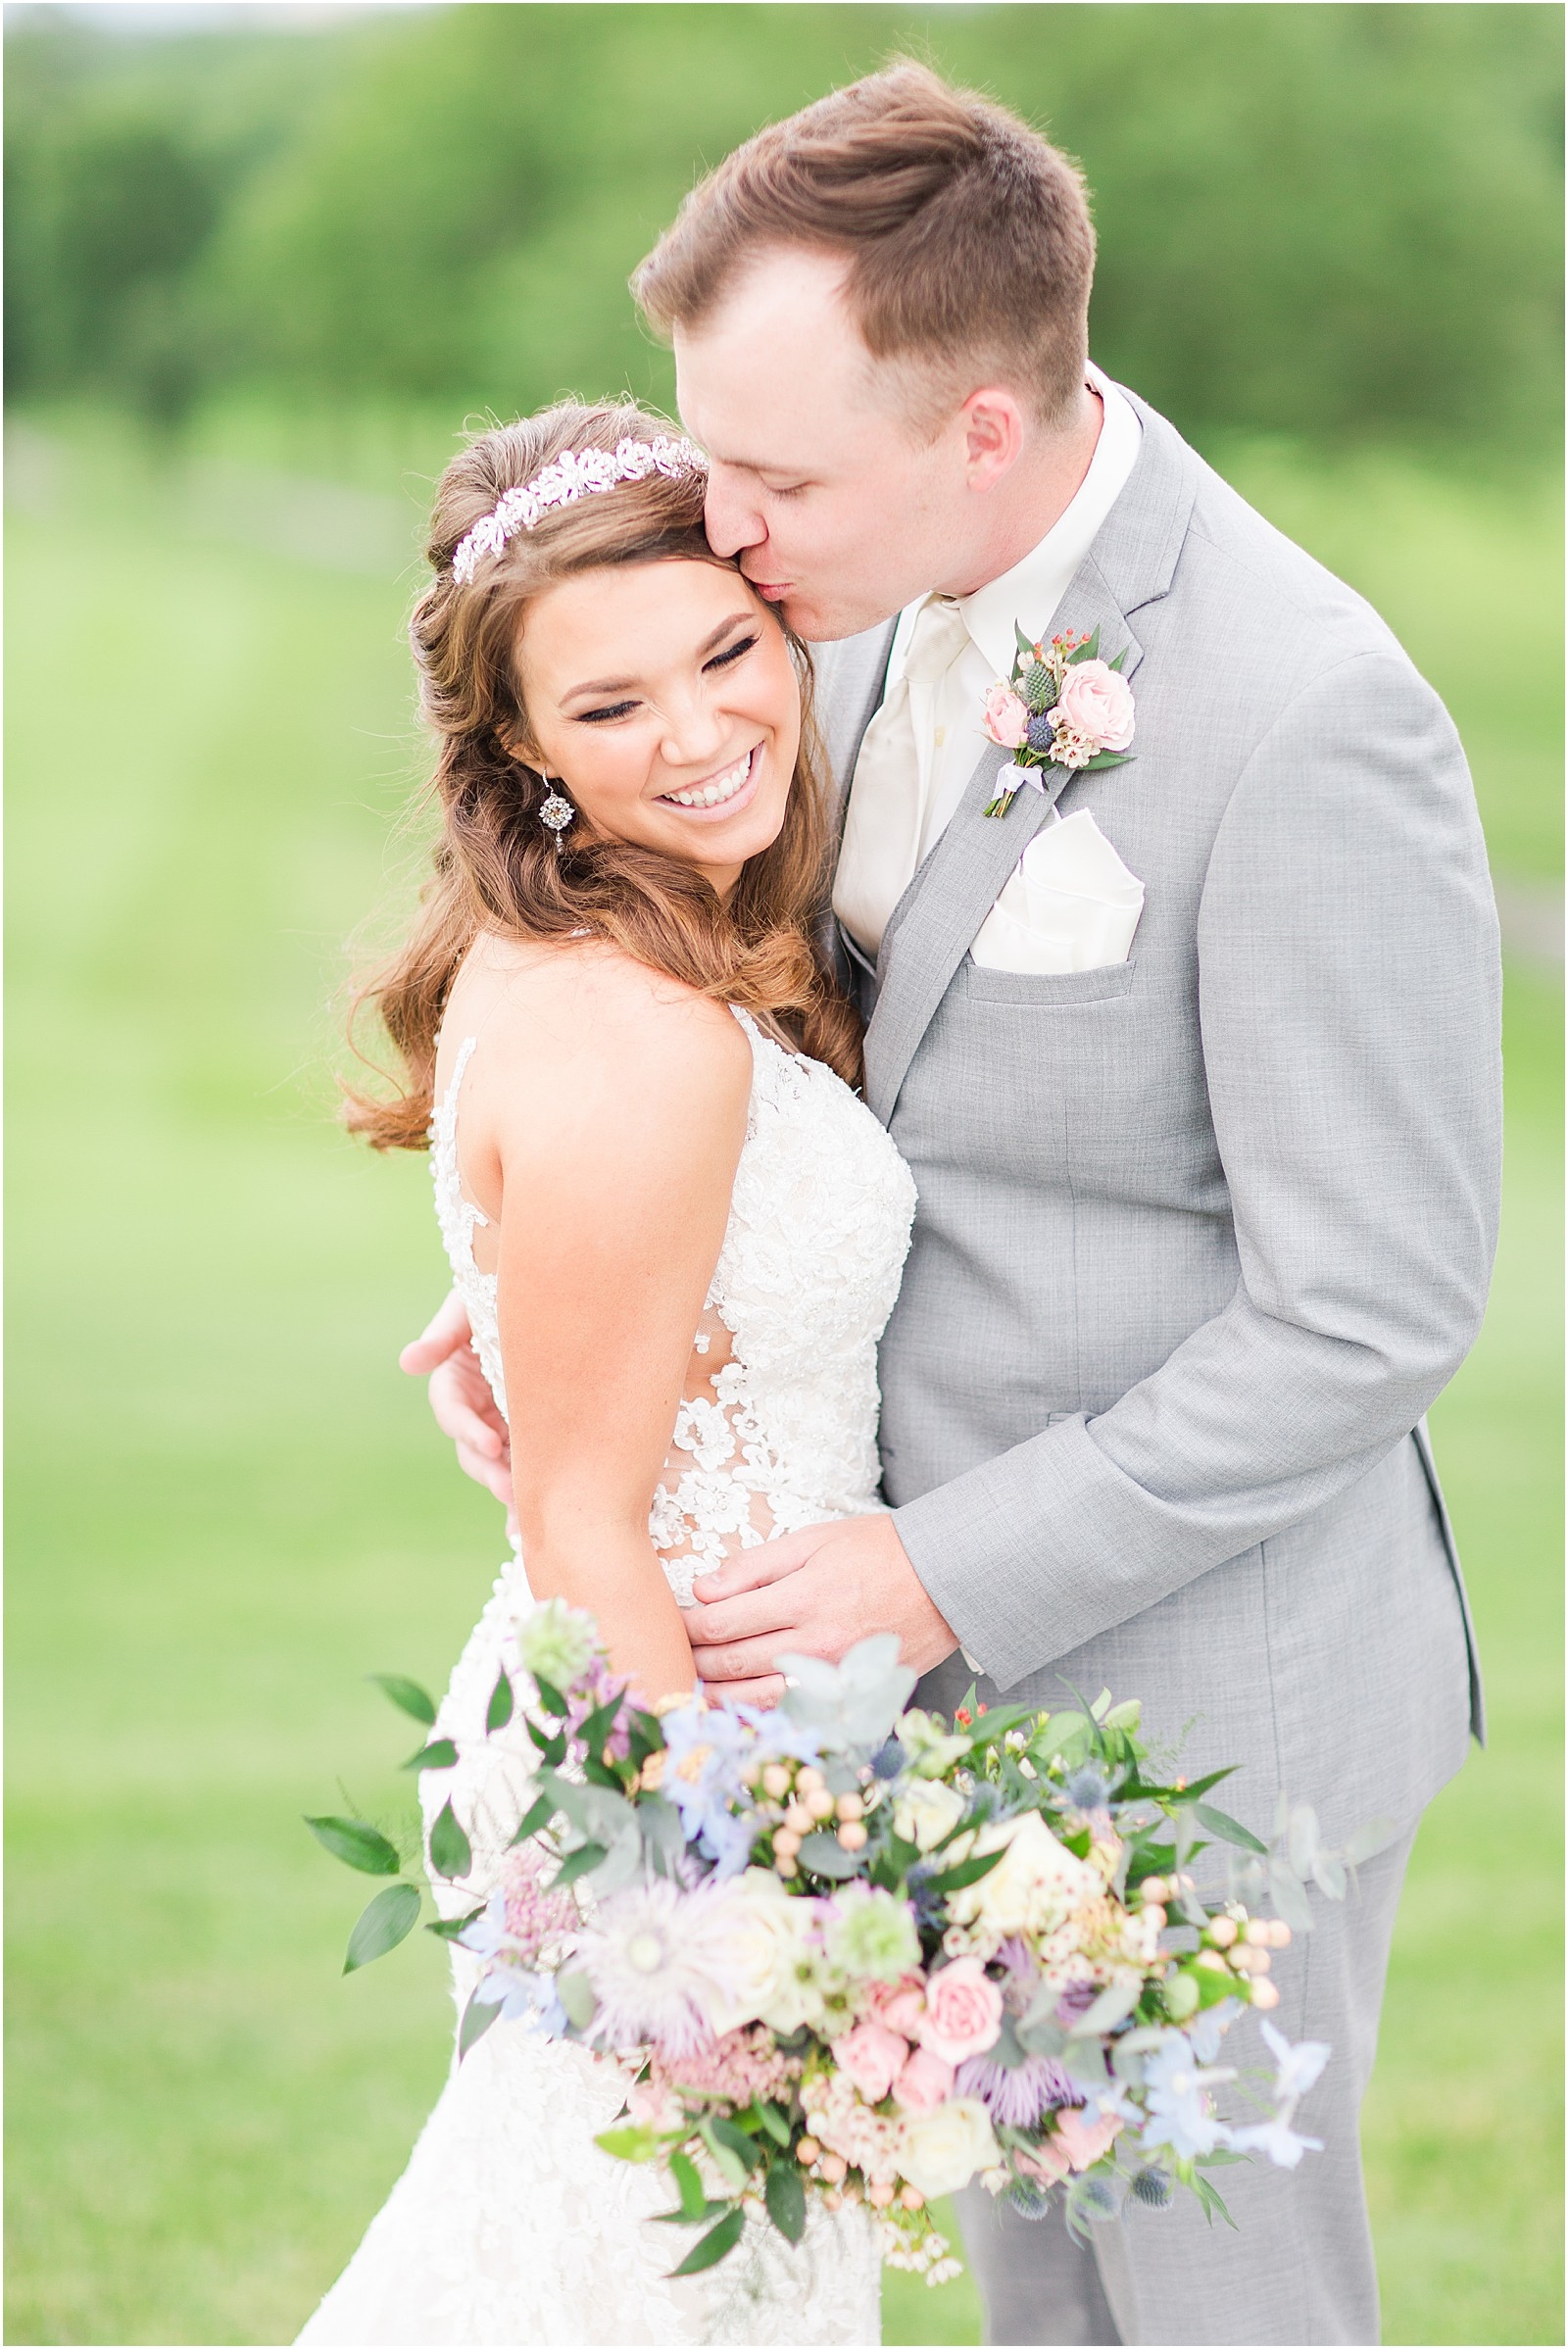 An Evansville County Club Wedding | Abby and Stratton 054.jpg